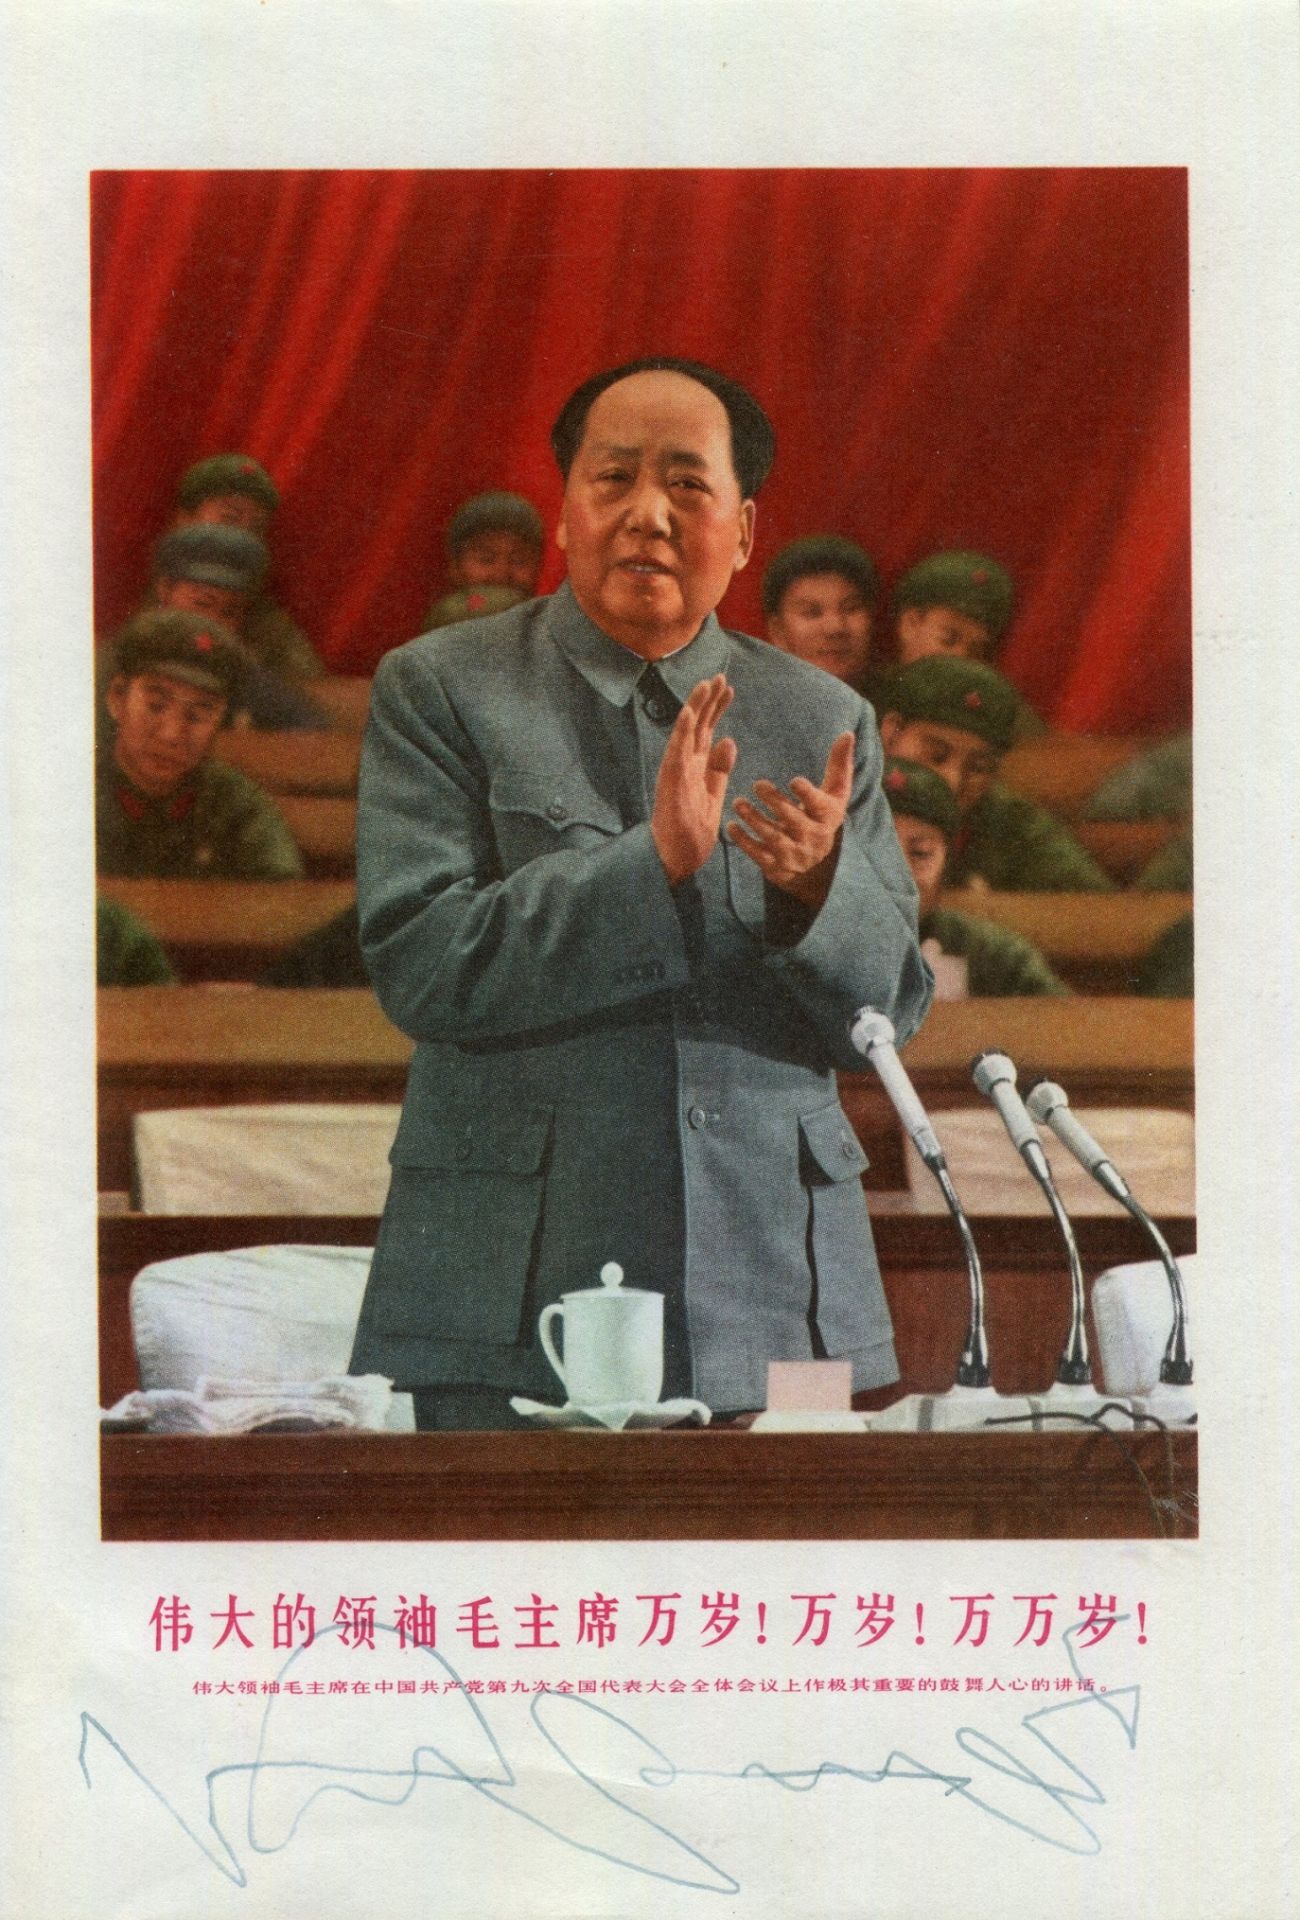 ZEDONG MAO: (1893-1976) Mao Tse-tung. Chairman of the Communist Party of China 1943-76 and